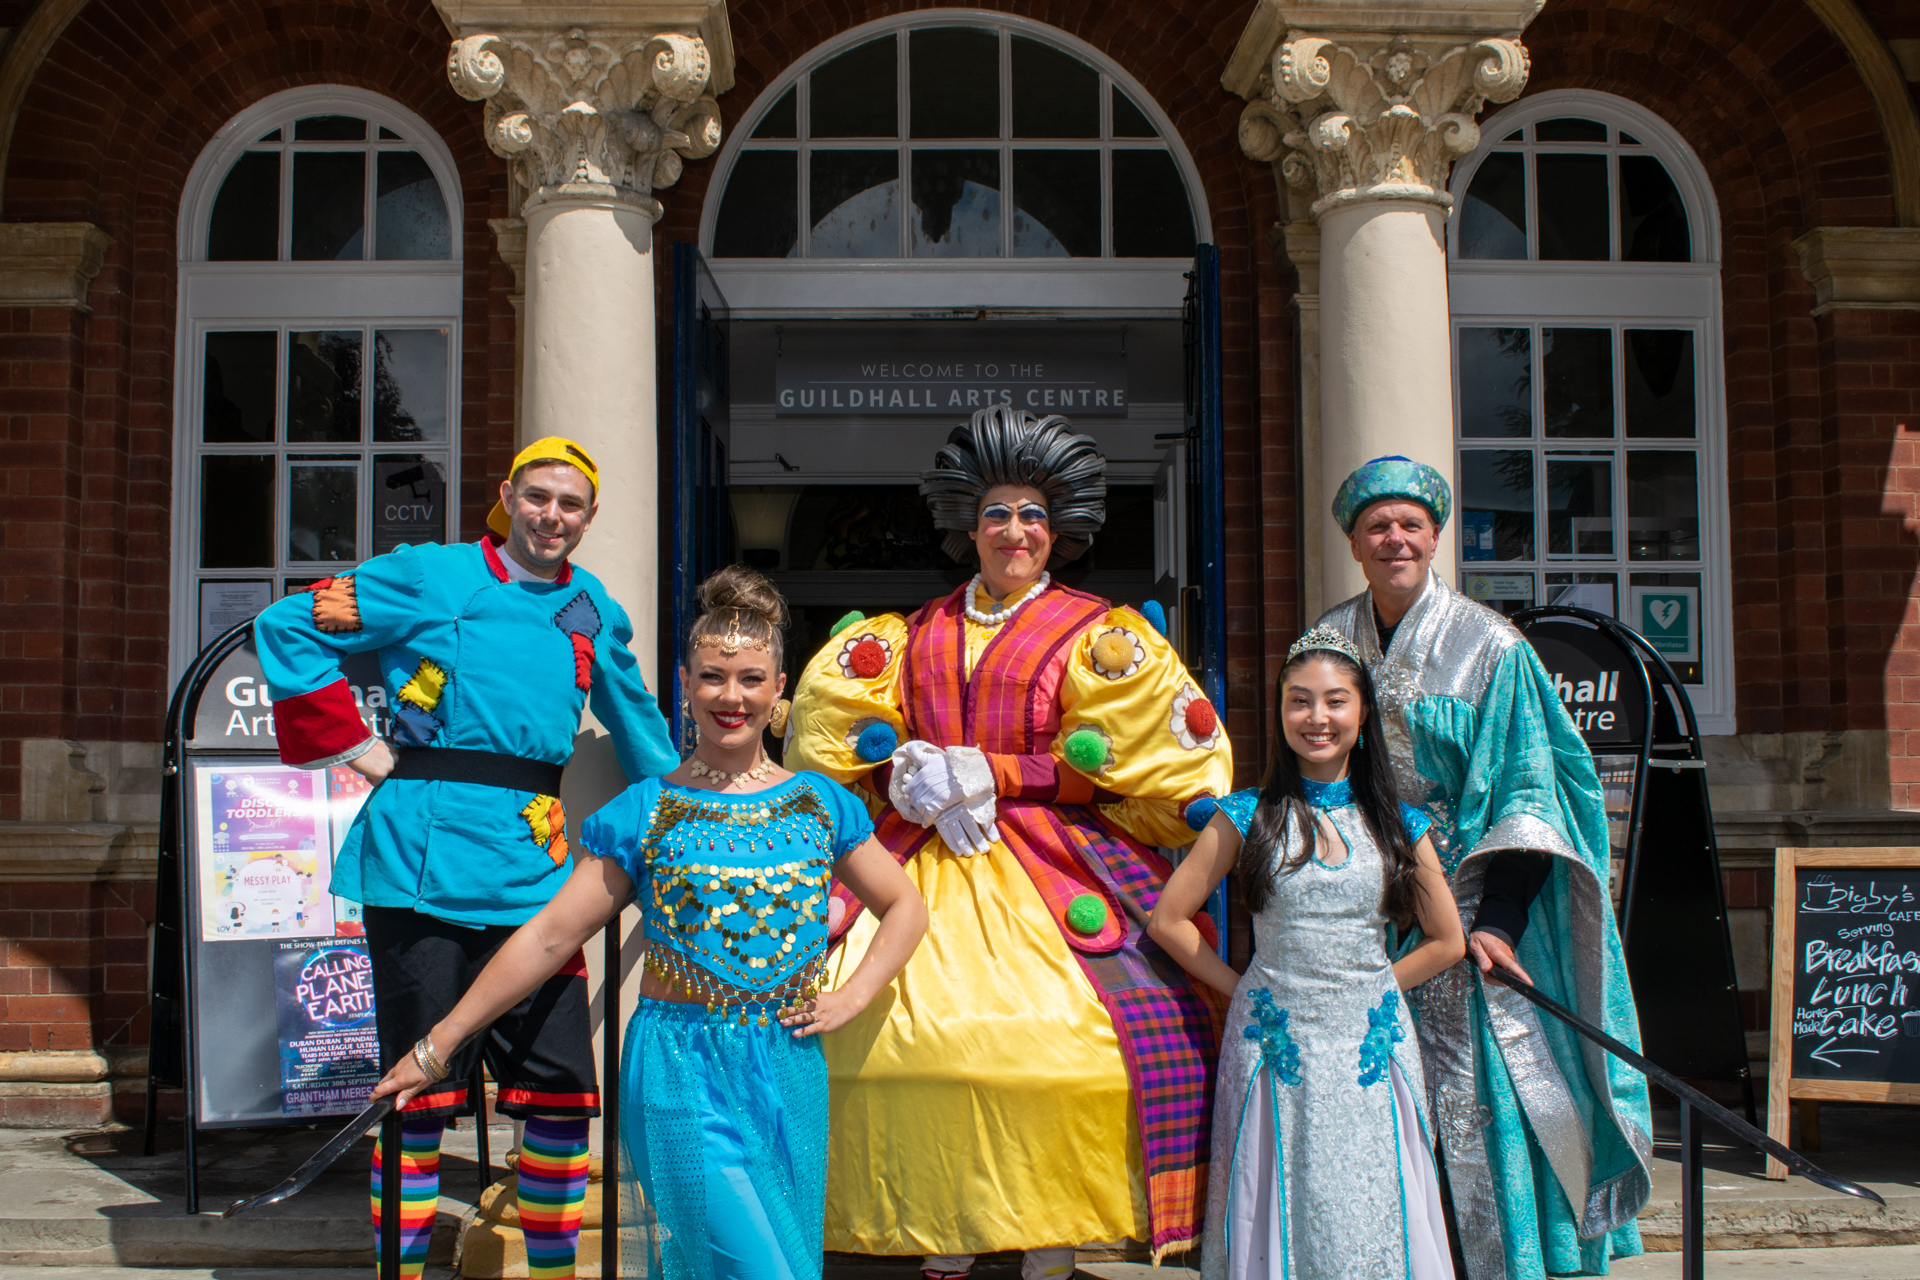 Panto cast at the front of the Guildhall Arts Centre